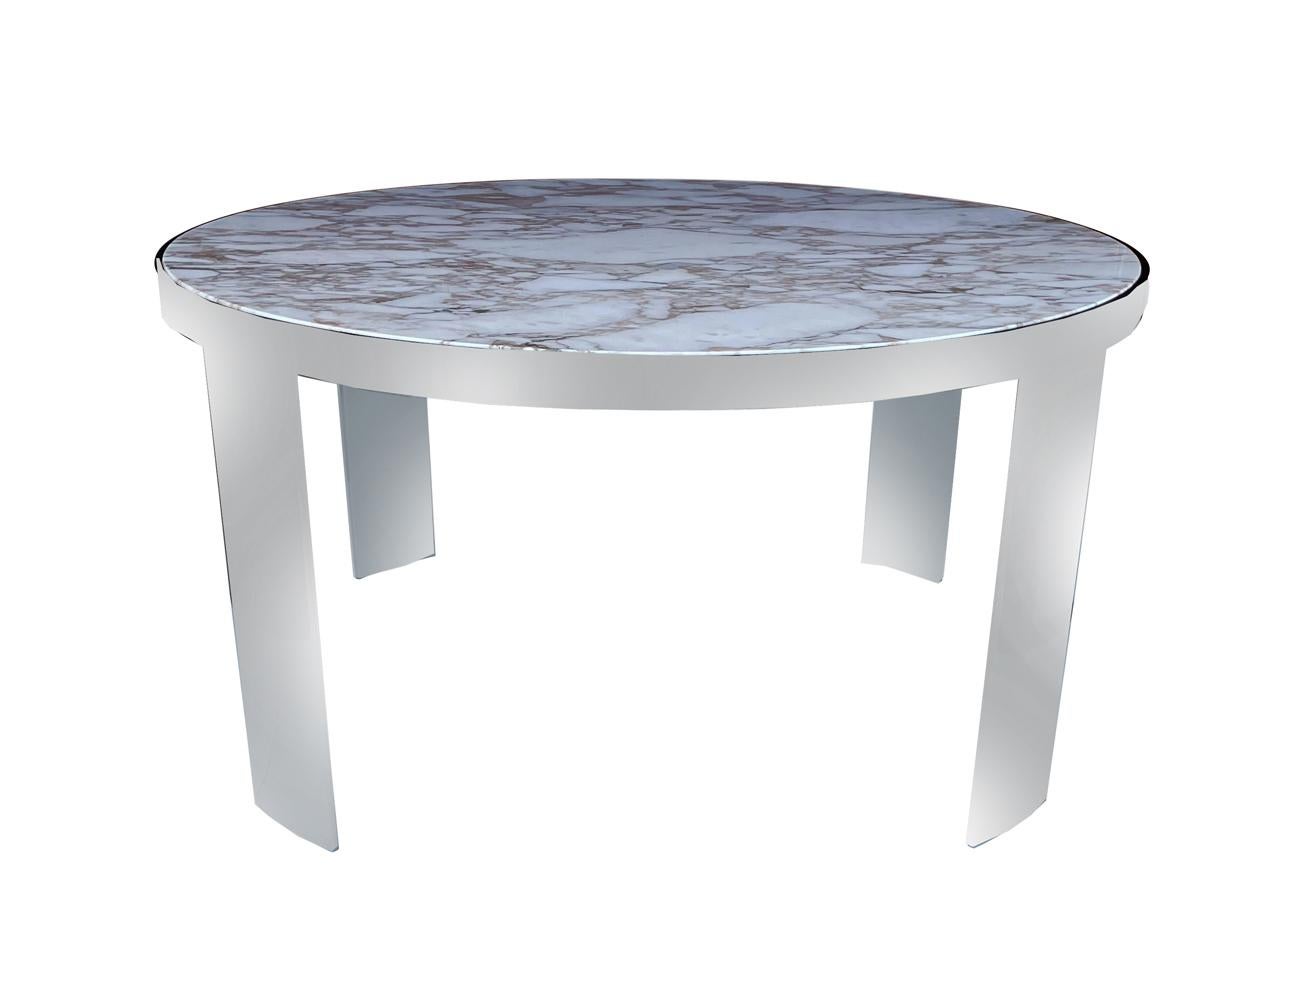 A large and impressive circular dining table designed by Leon Rosen and produced by Pace in the 1970's. It consists of a chrome plated steel base with inlayed Italian calacatta gold marble.